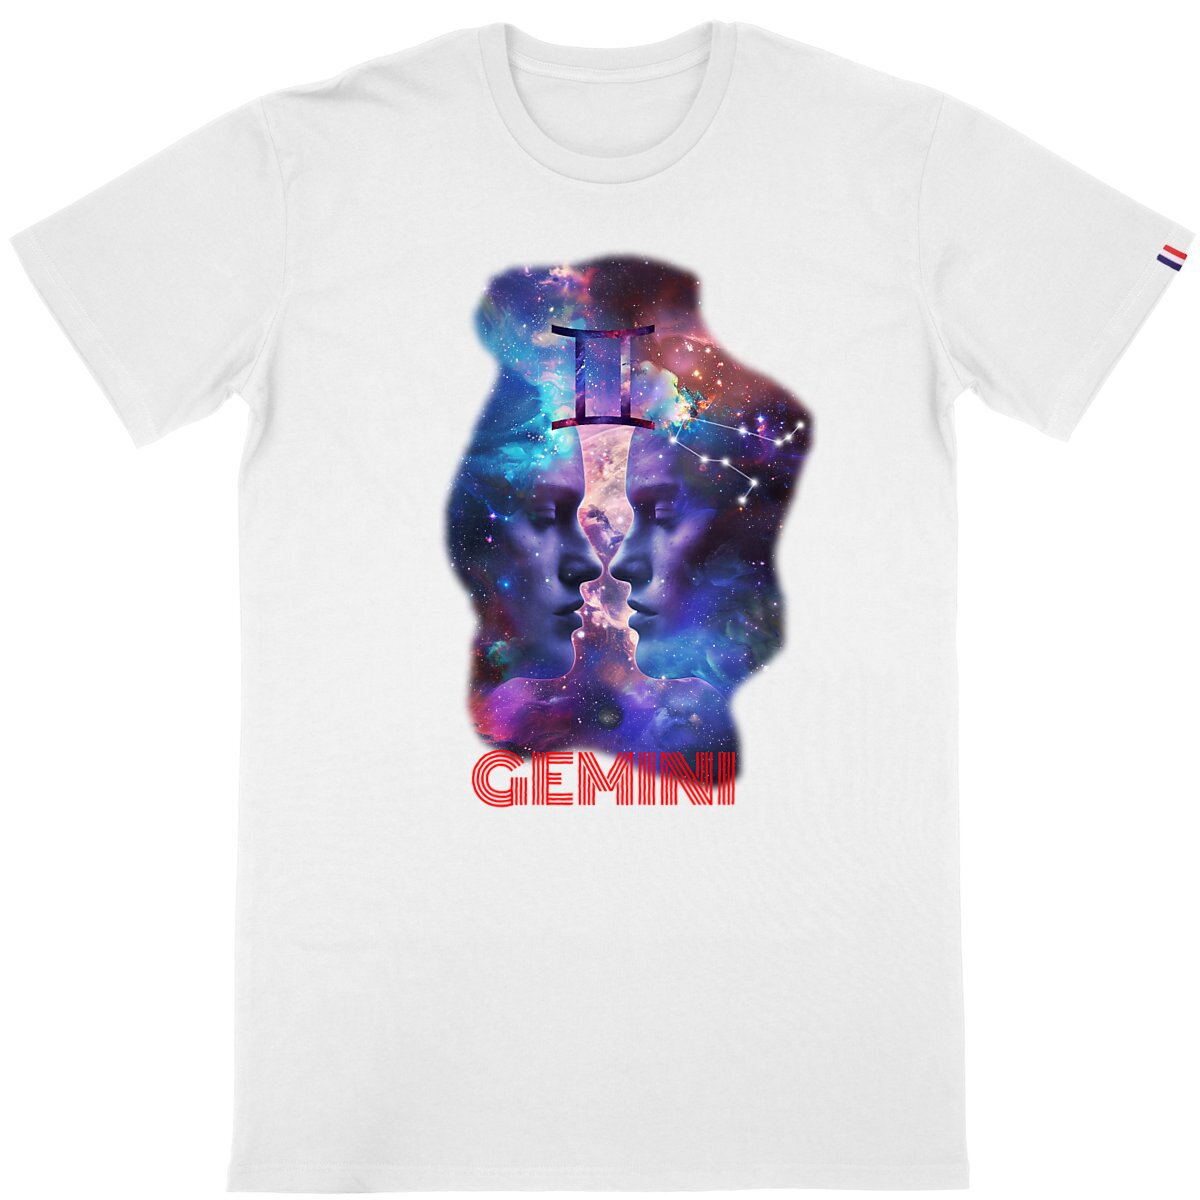 T-shirt "Gemini" Made in France - Homme